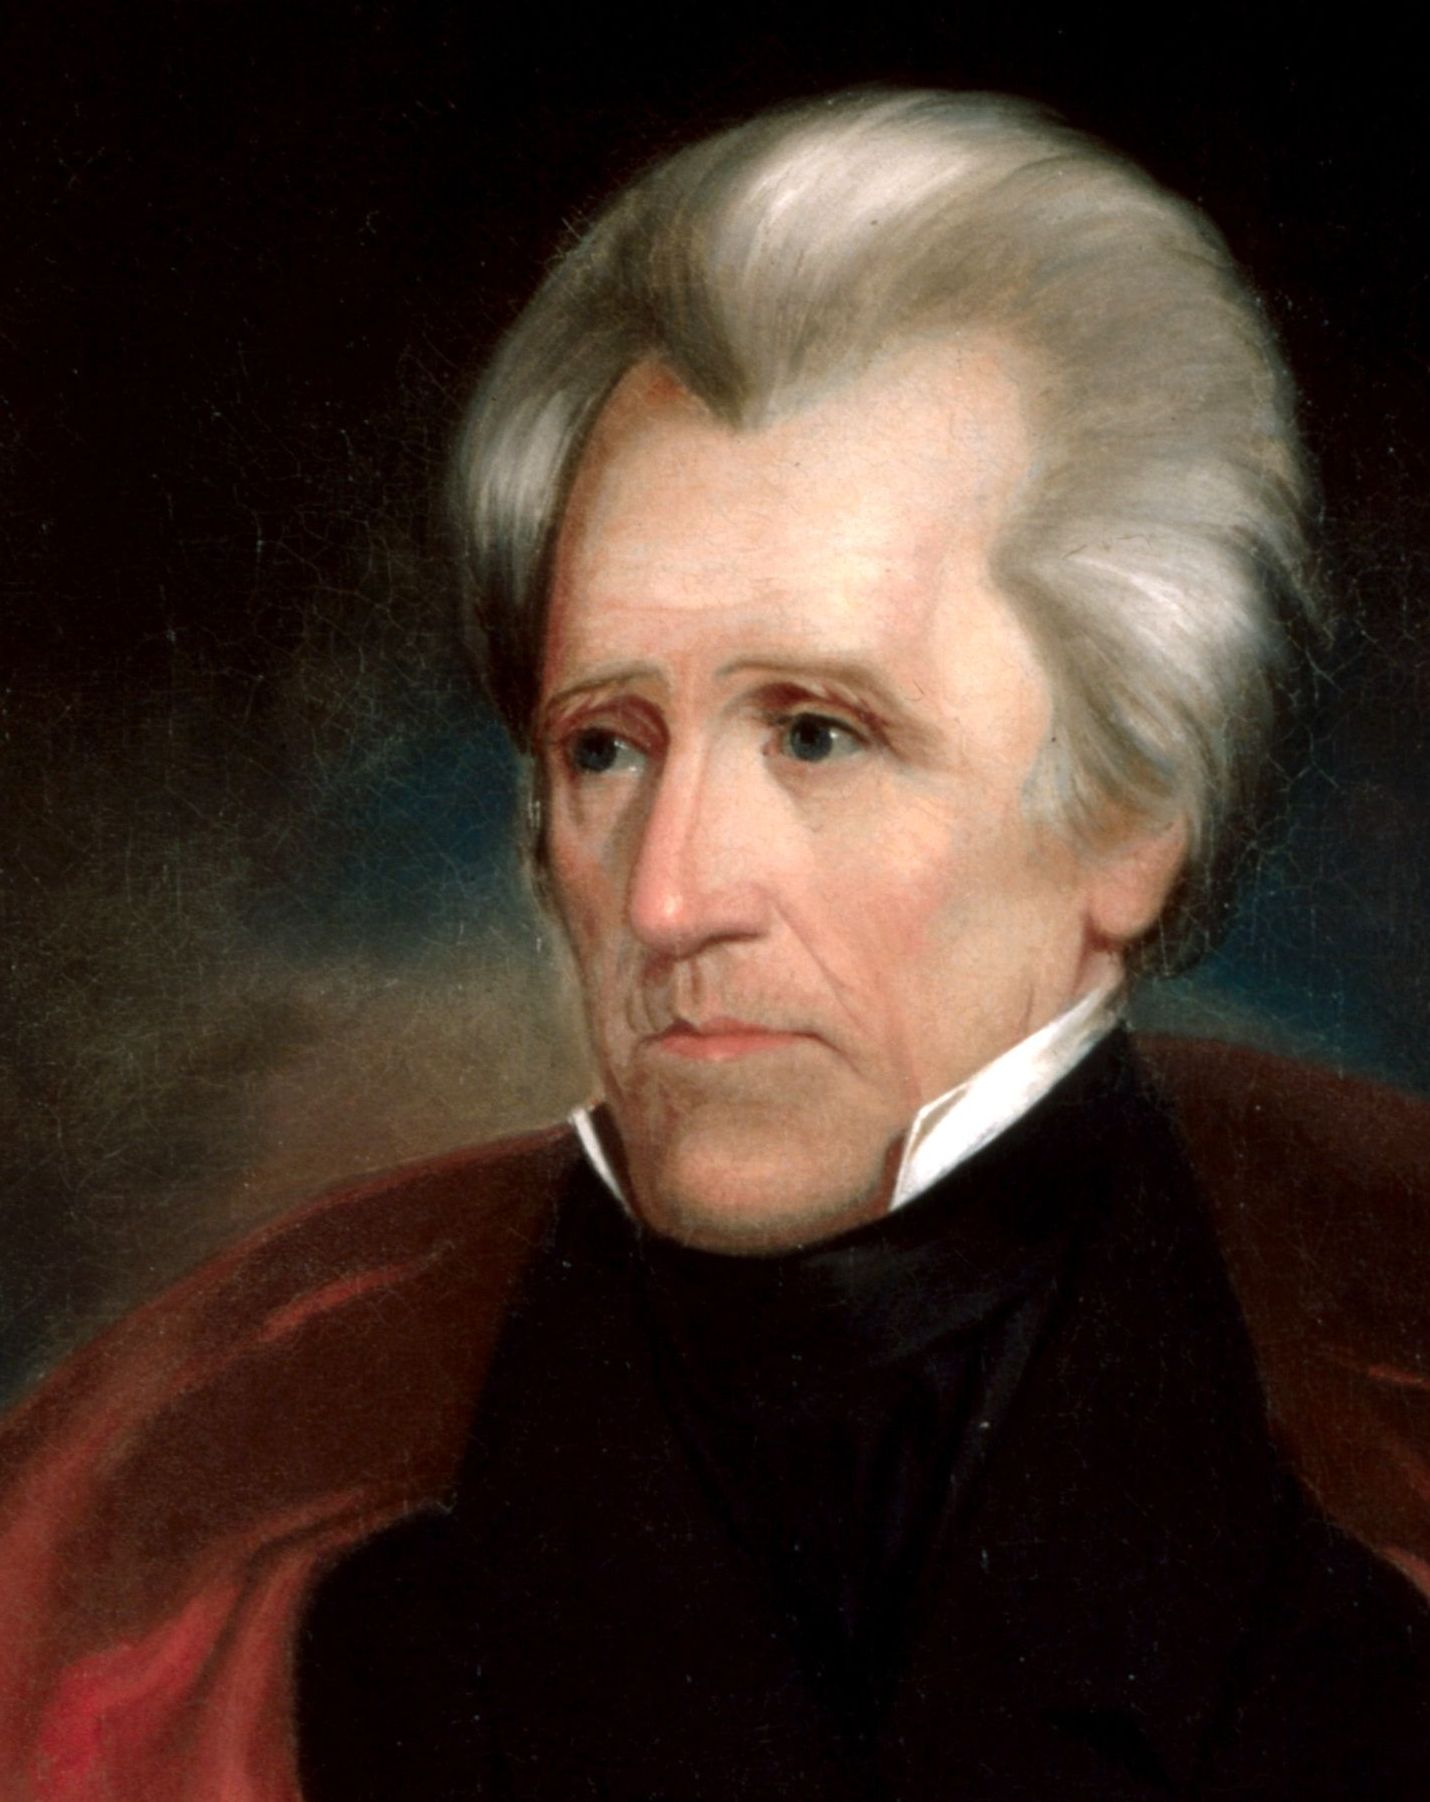 Andrew Jackson broke with many precedents during his two terms.